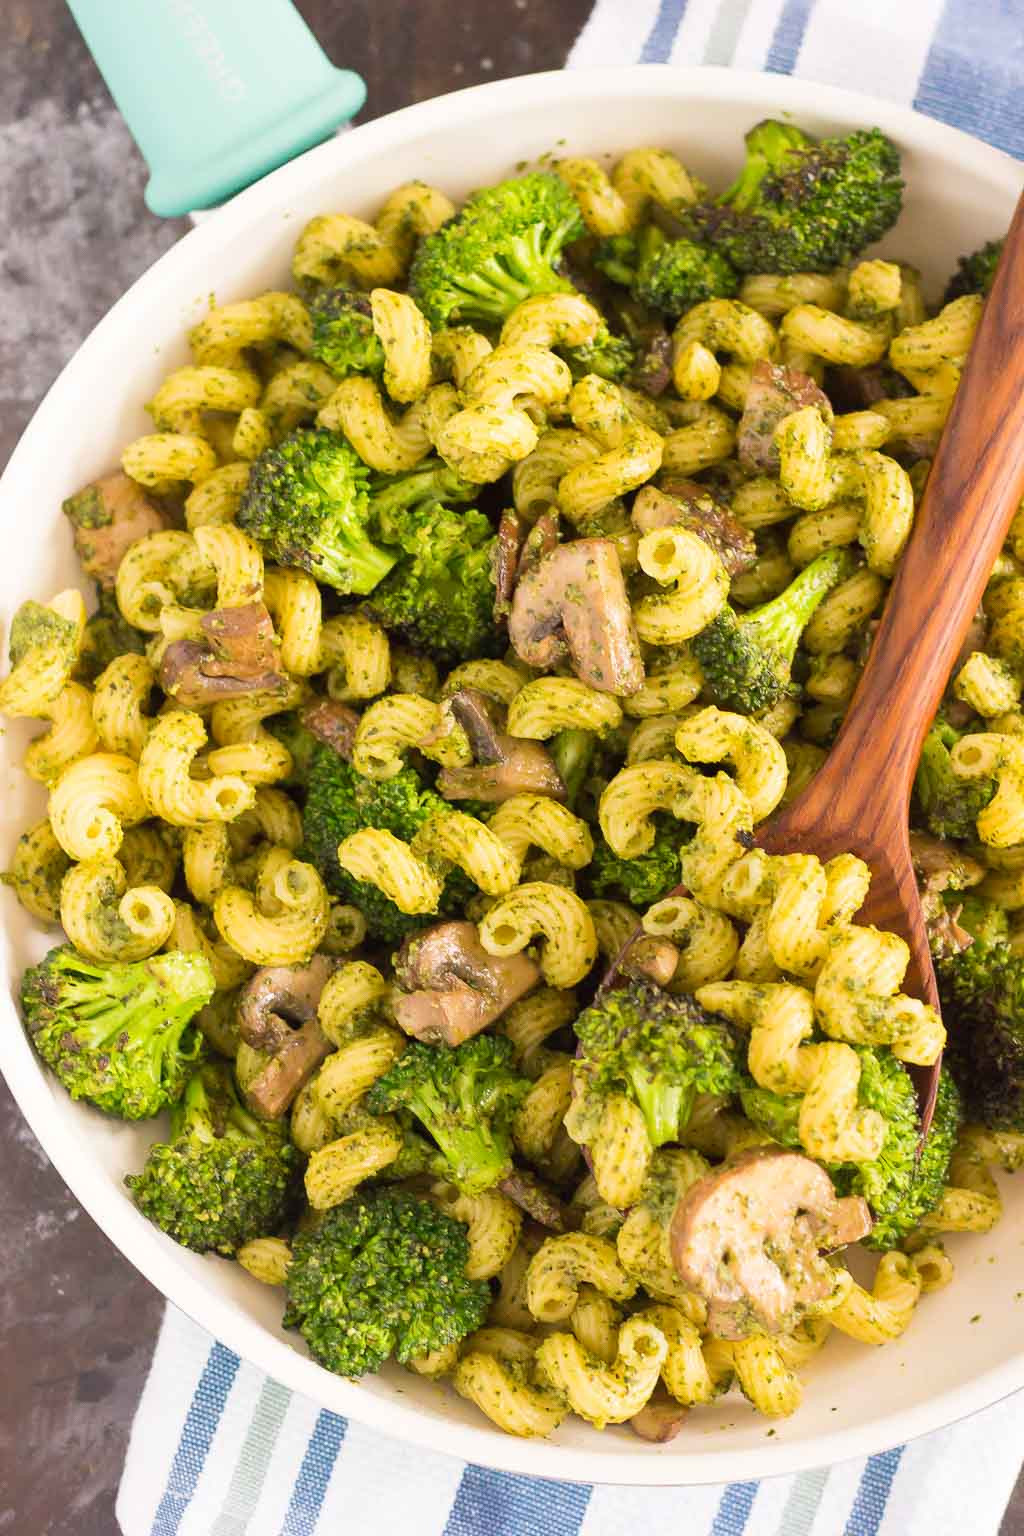 Pasta With Broccoli
 30 Minute Thursday Basil Pesto Pasta with Broccoli and